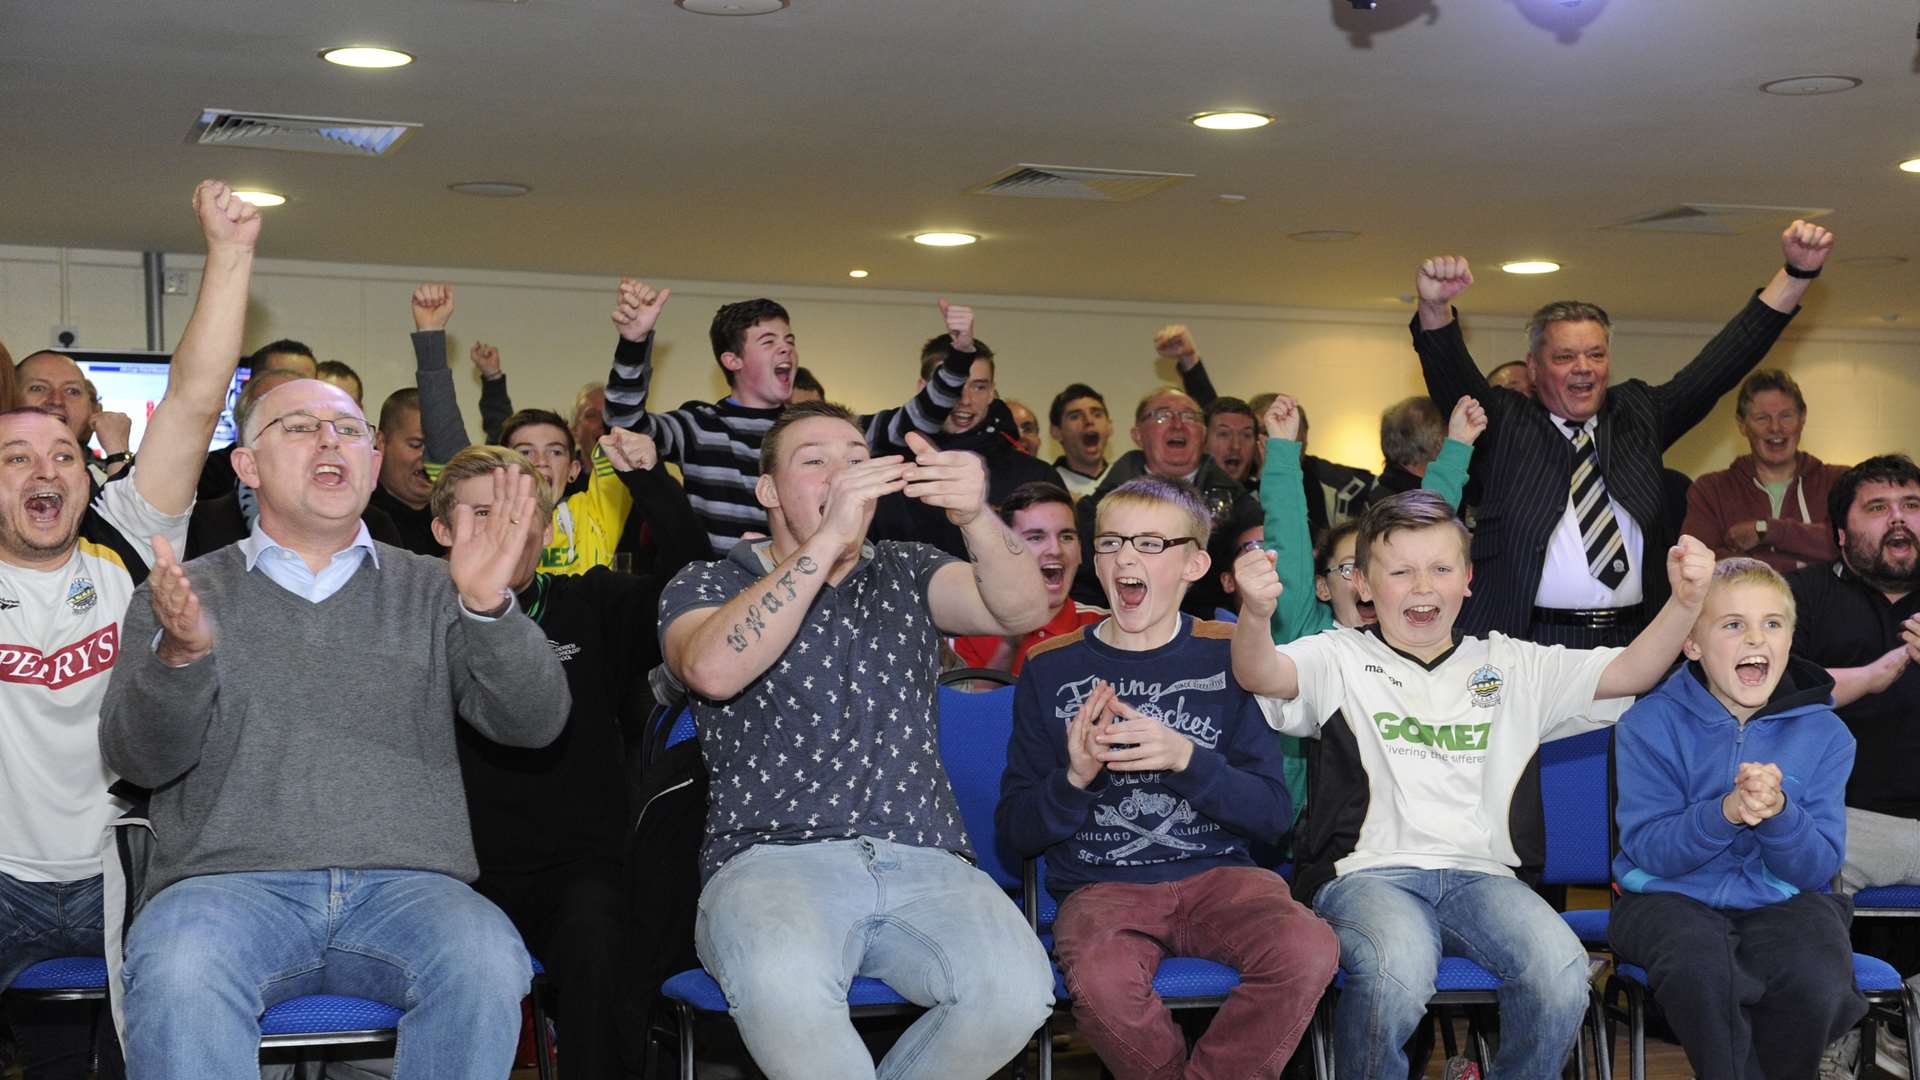 Dover Dover Athletic supporters met for the draw for the third round of the FA Cu on Monday.